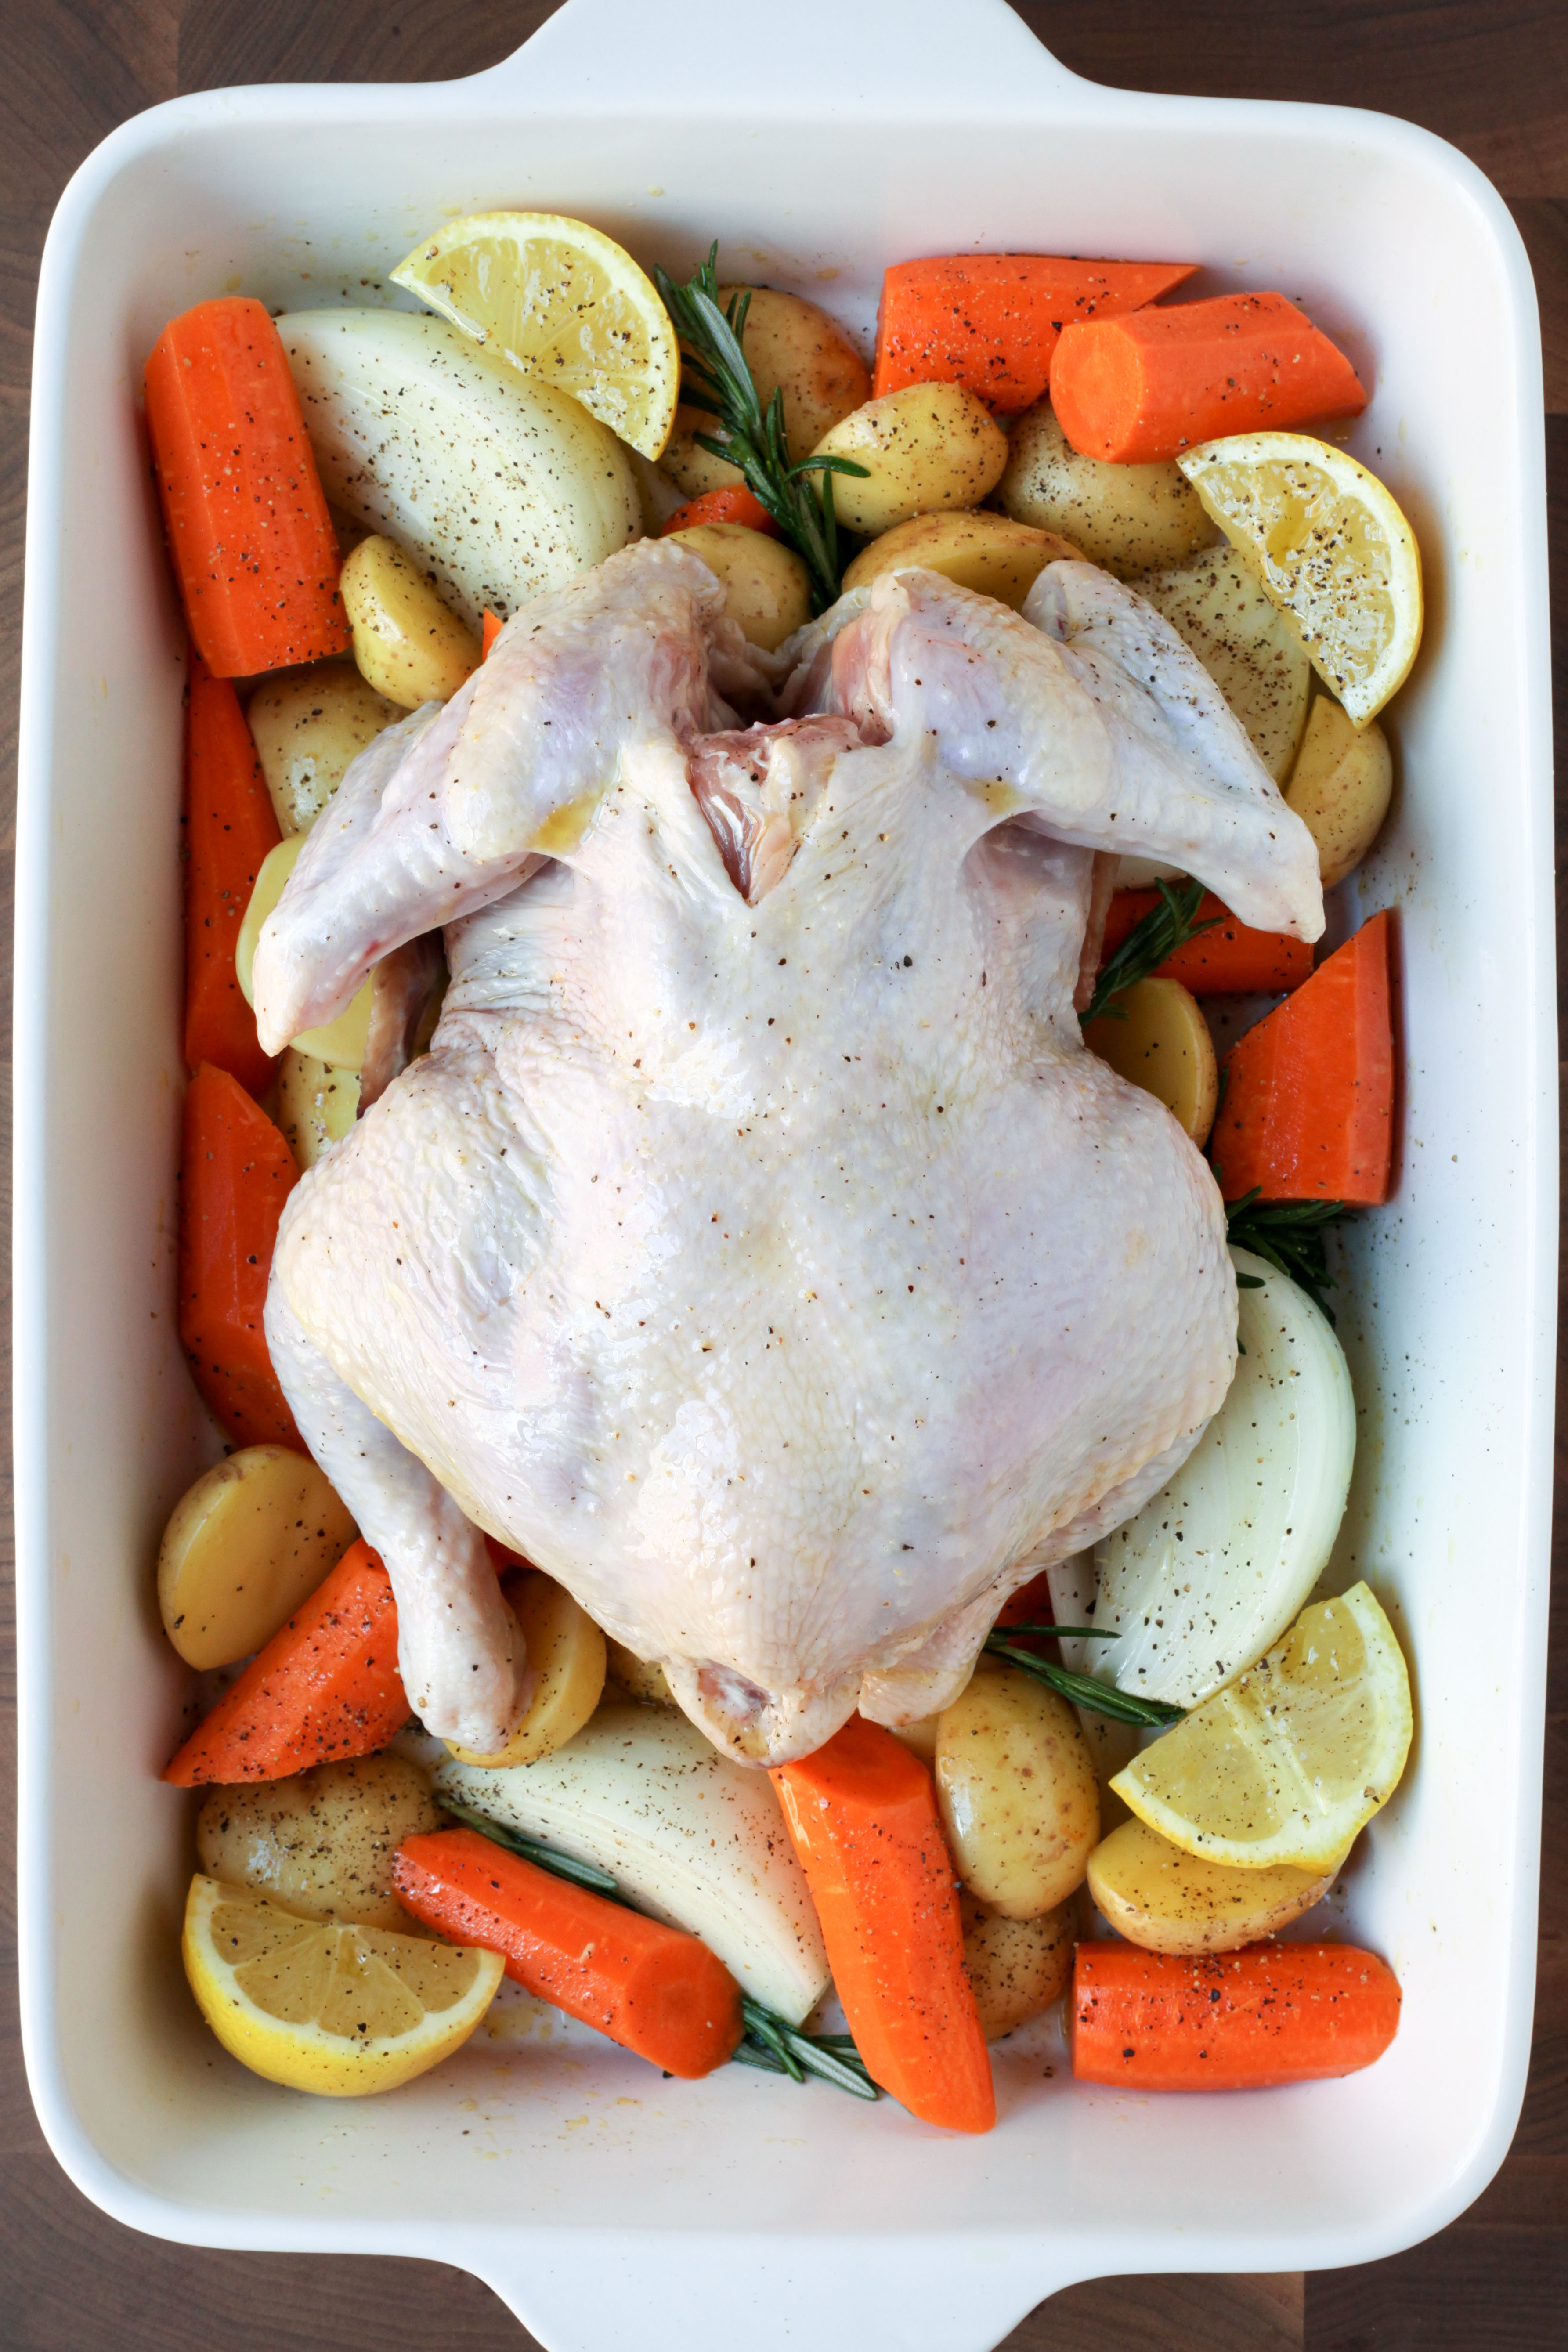 Chicken on a bed of vegetables